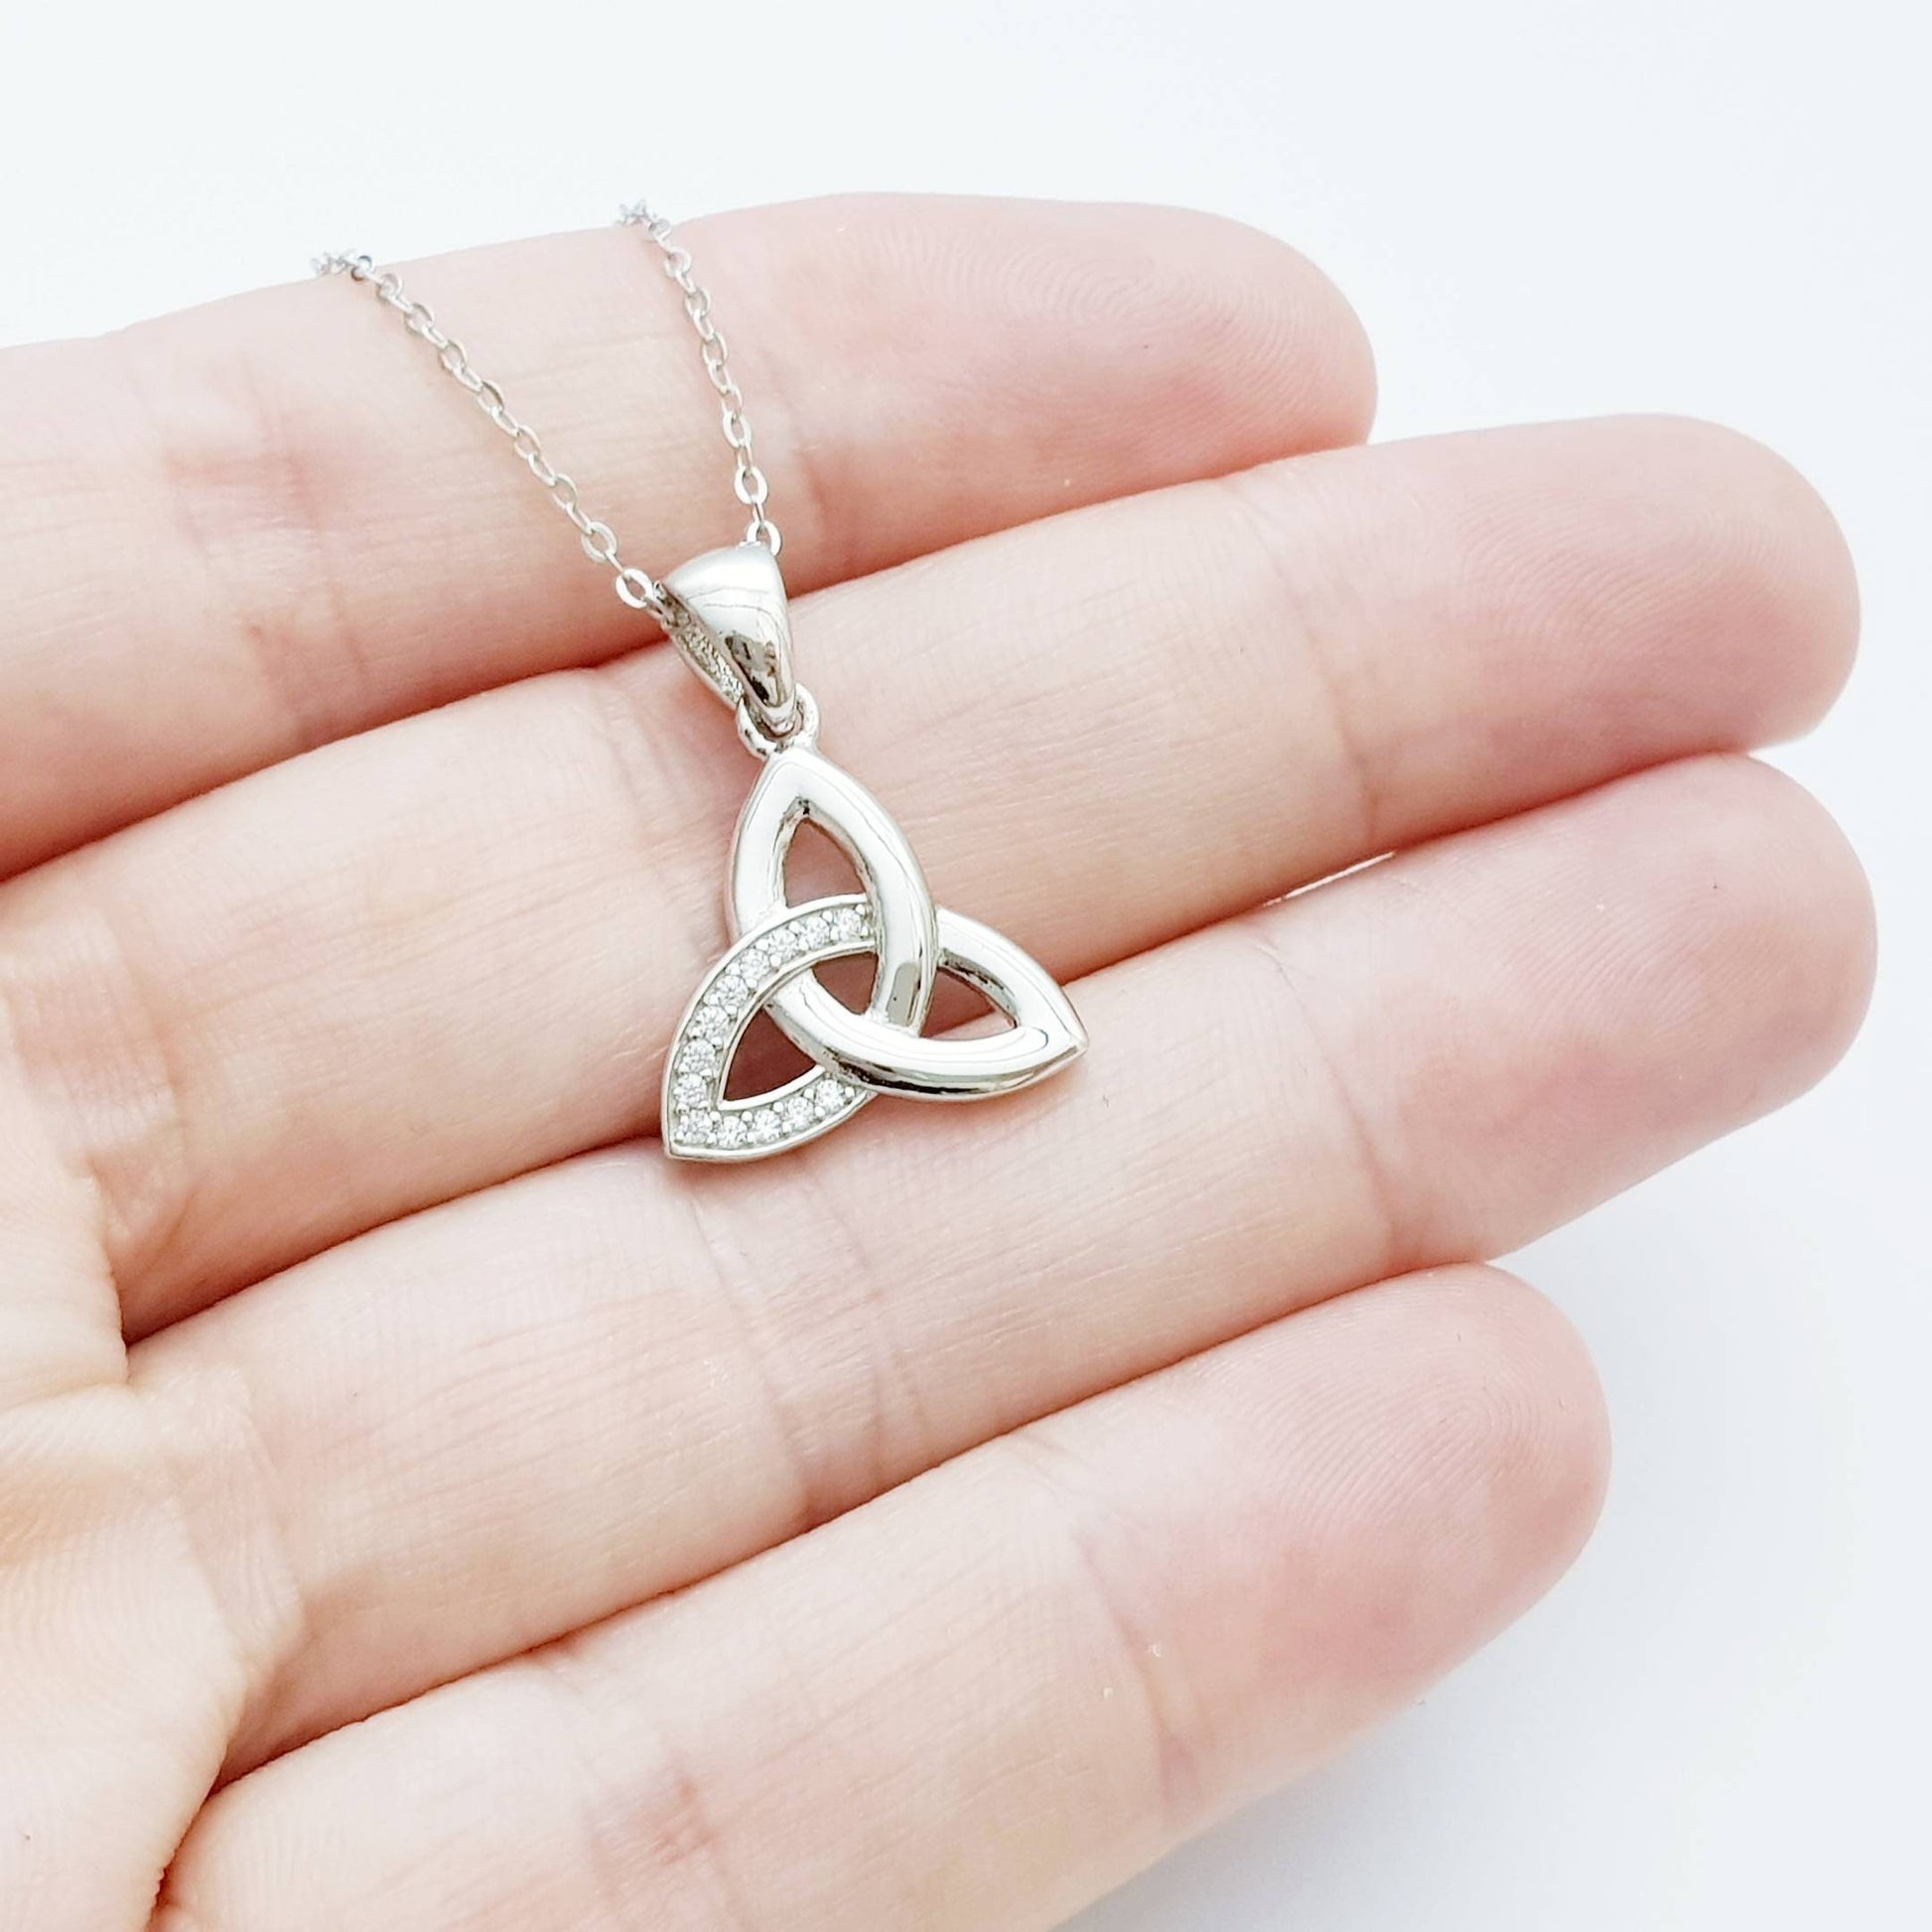 Celtic Trinity knot pendant, celtic necklace made in Ireland